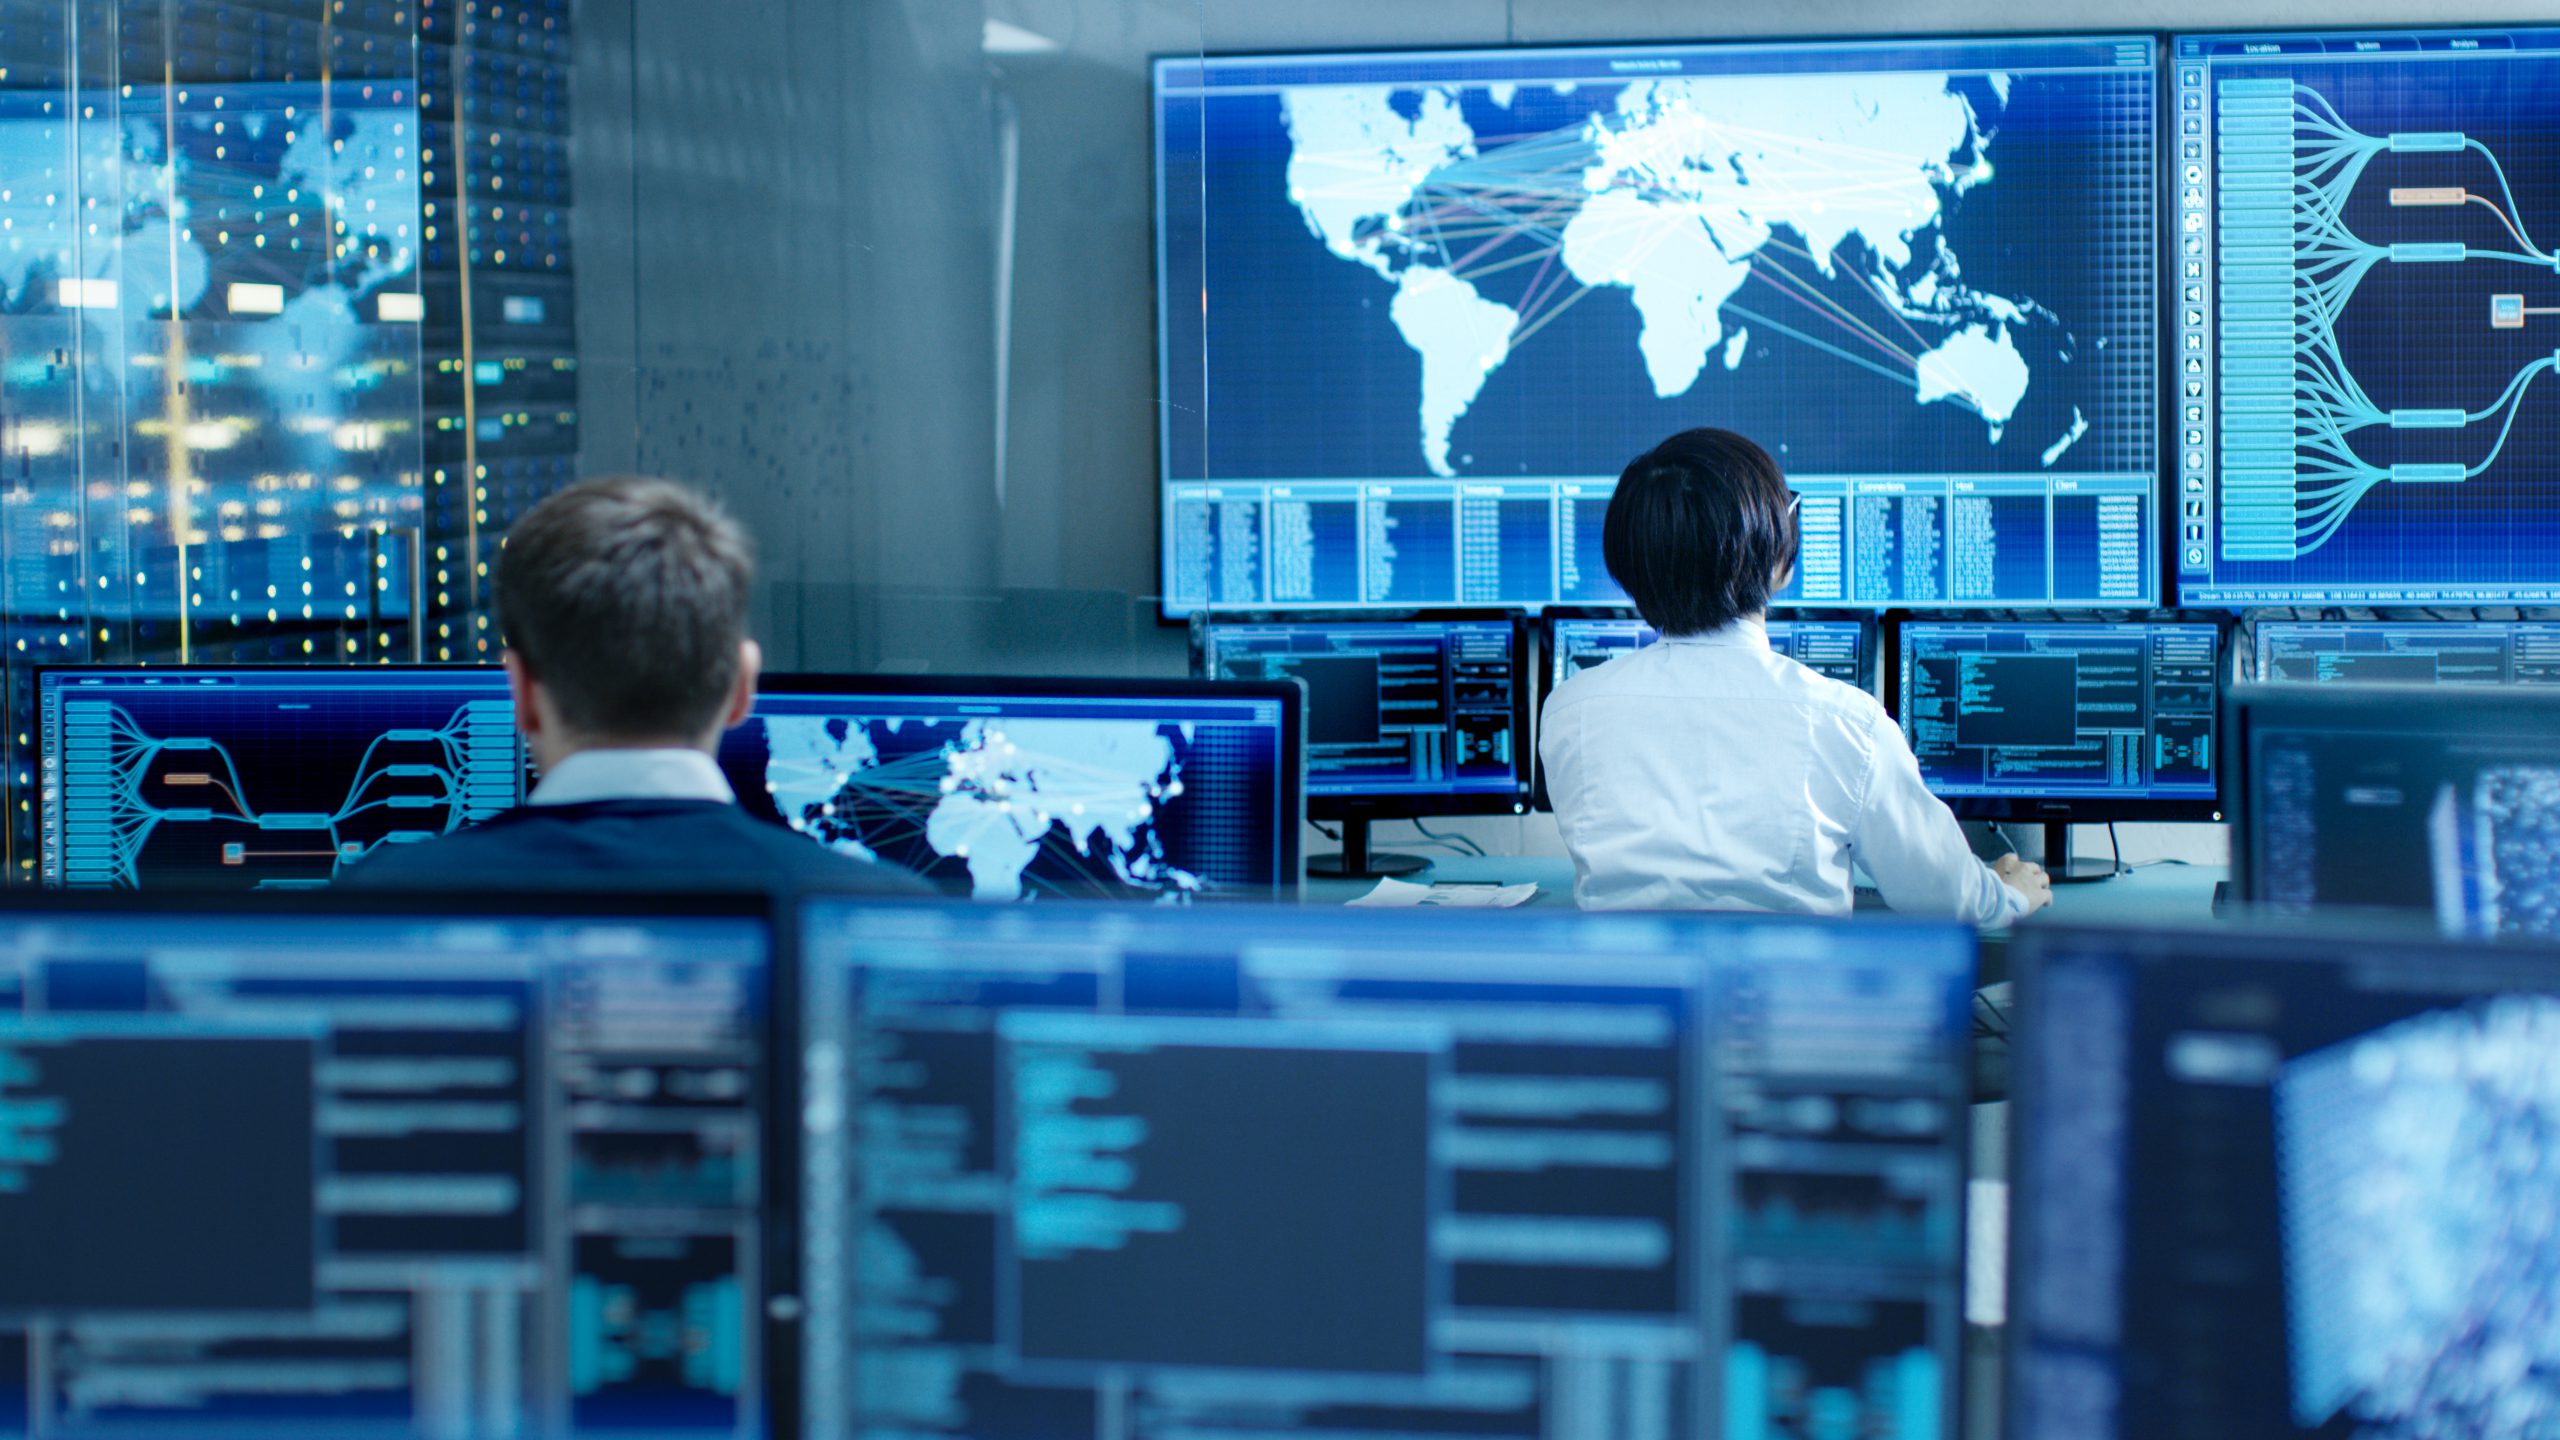 In the System Control Room Operator and Administrator Sitting at Their Workstations with Multiple Displays Showing Graphics and Logistics Information.